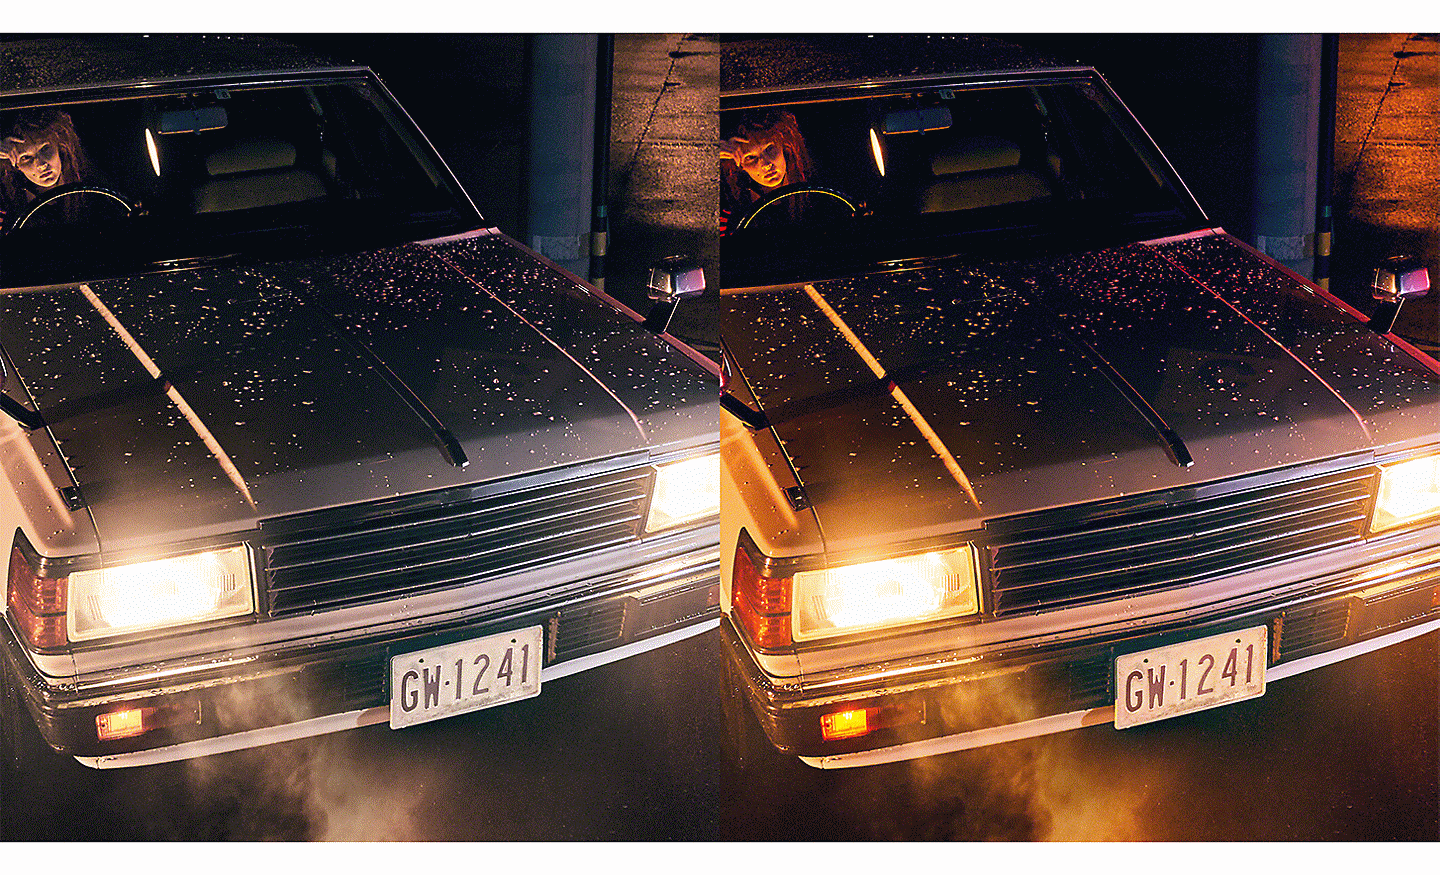 Two images of a car with headlights on, one with smoother colour gradation than the other.